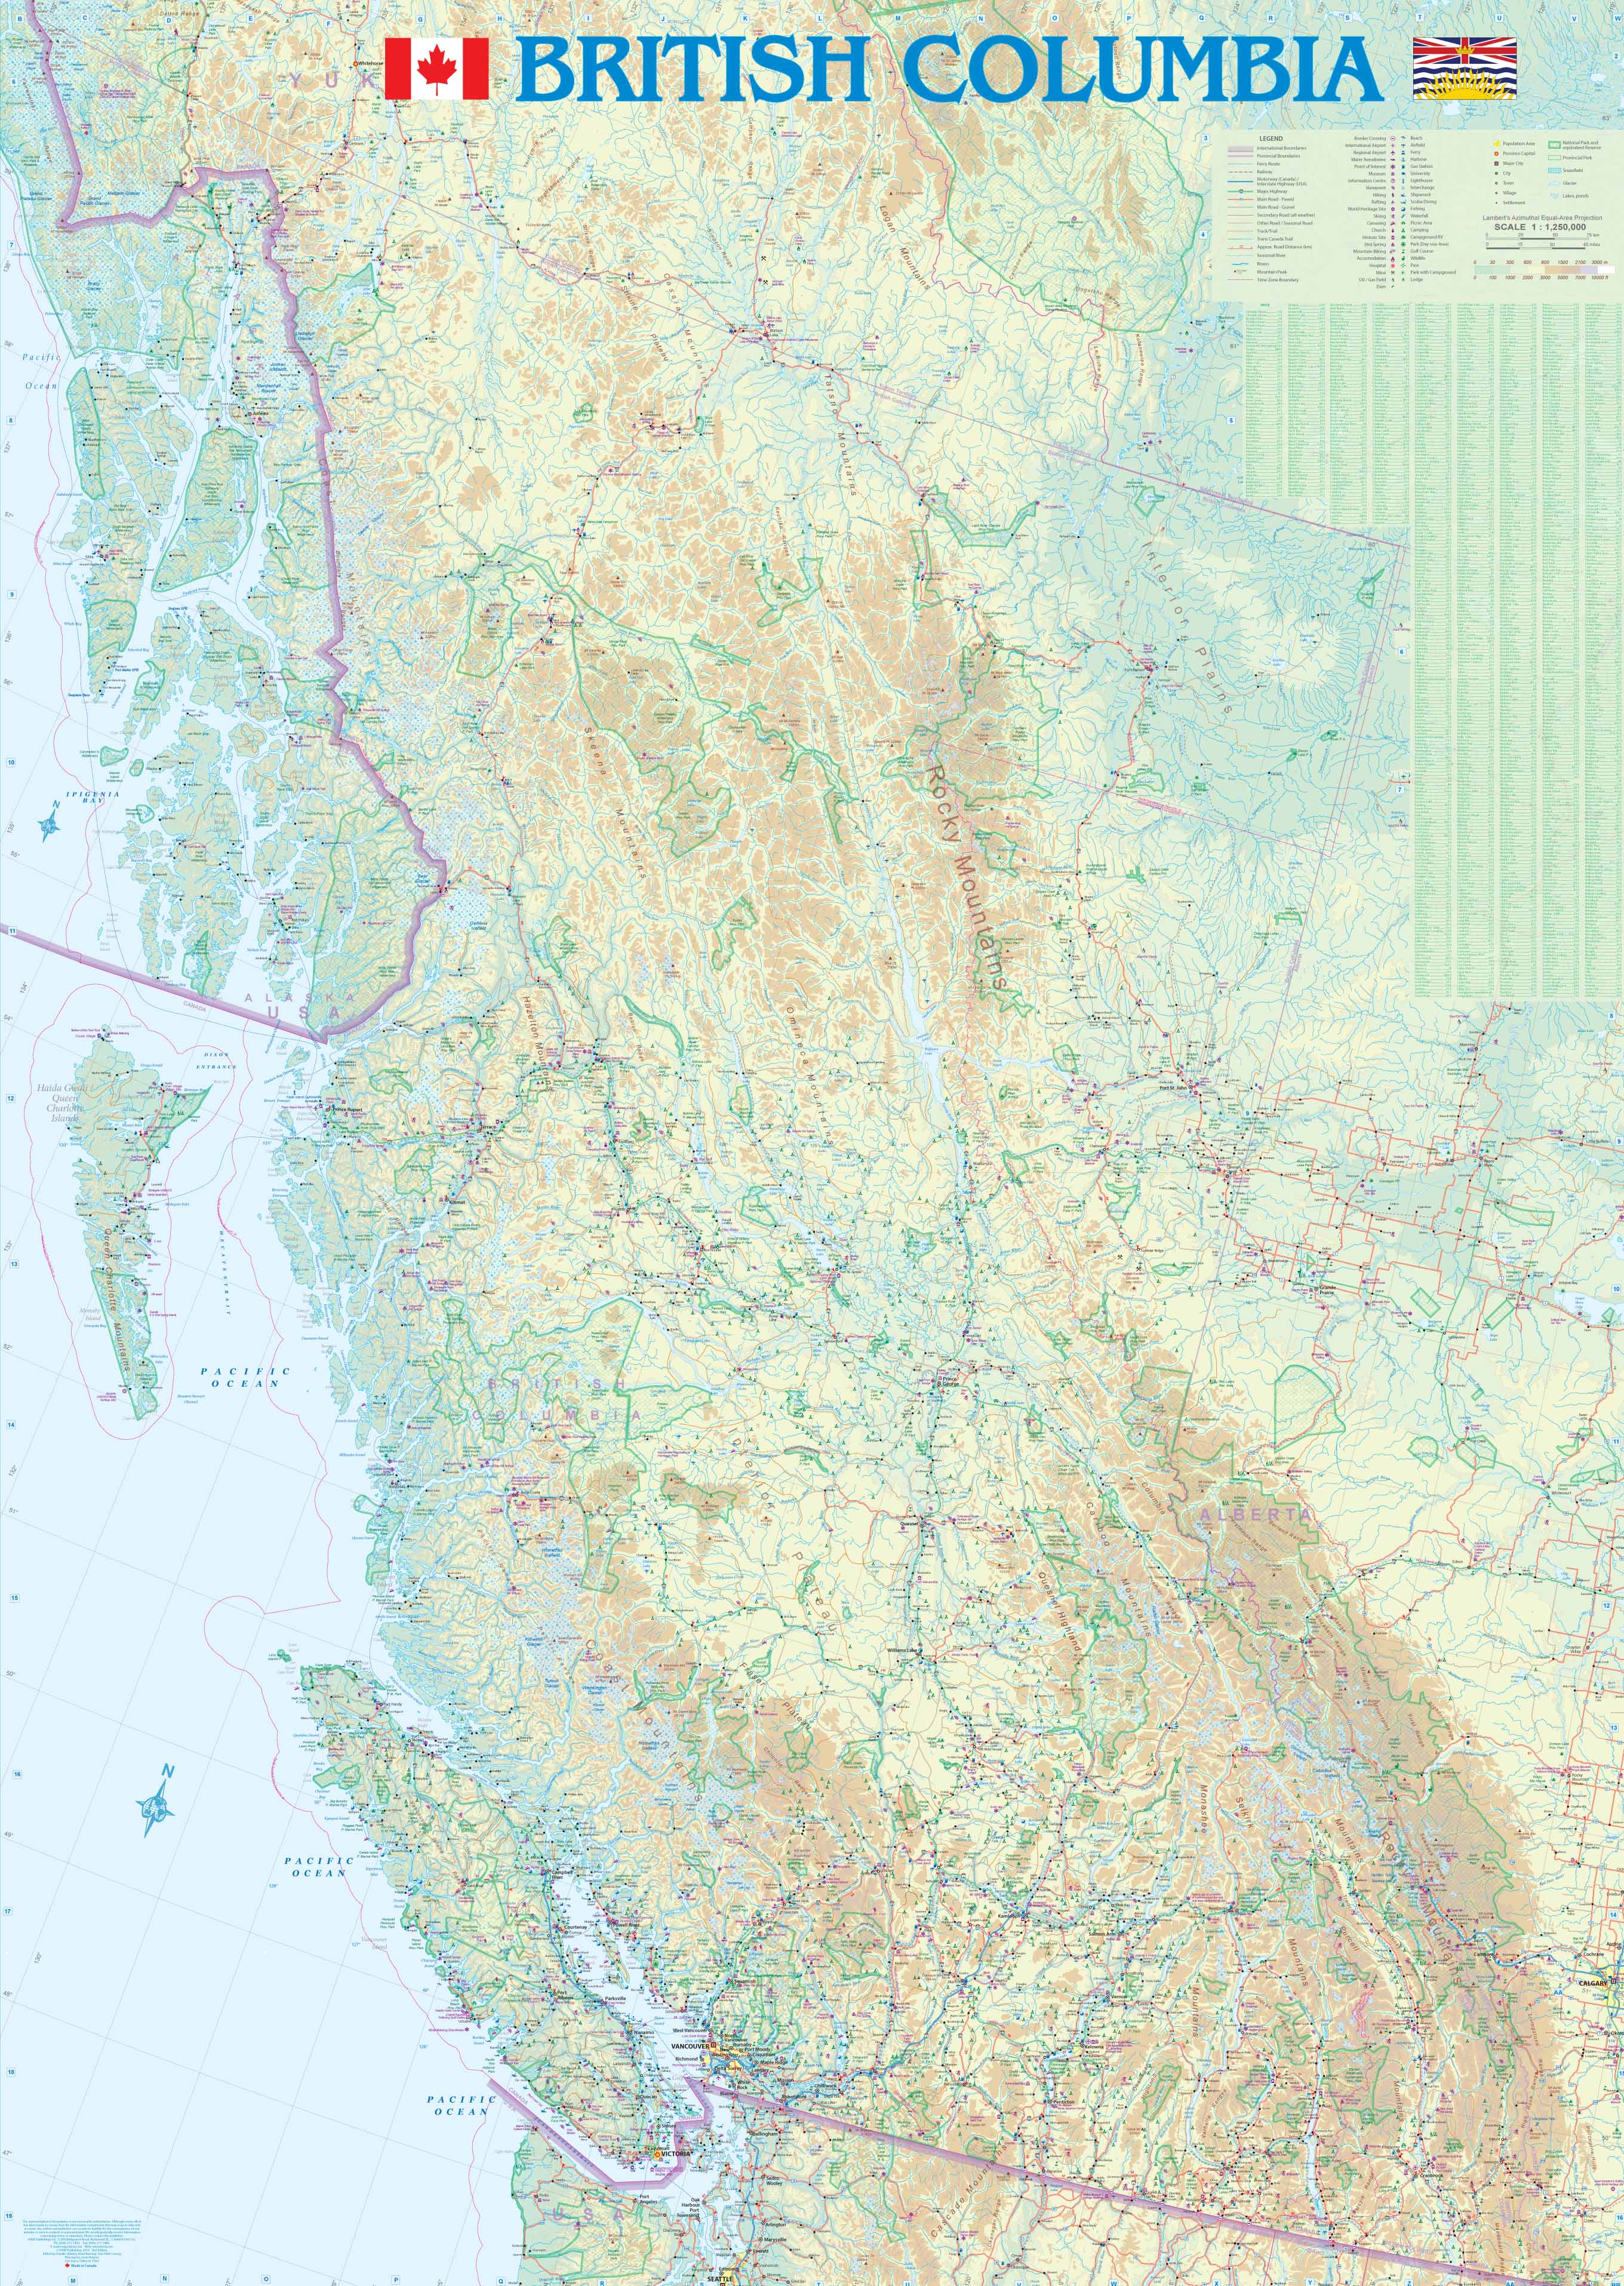 1. British Columbia Wall Map 2nd Ed. 2019 1:1,250,000 on paper